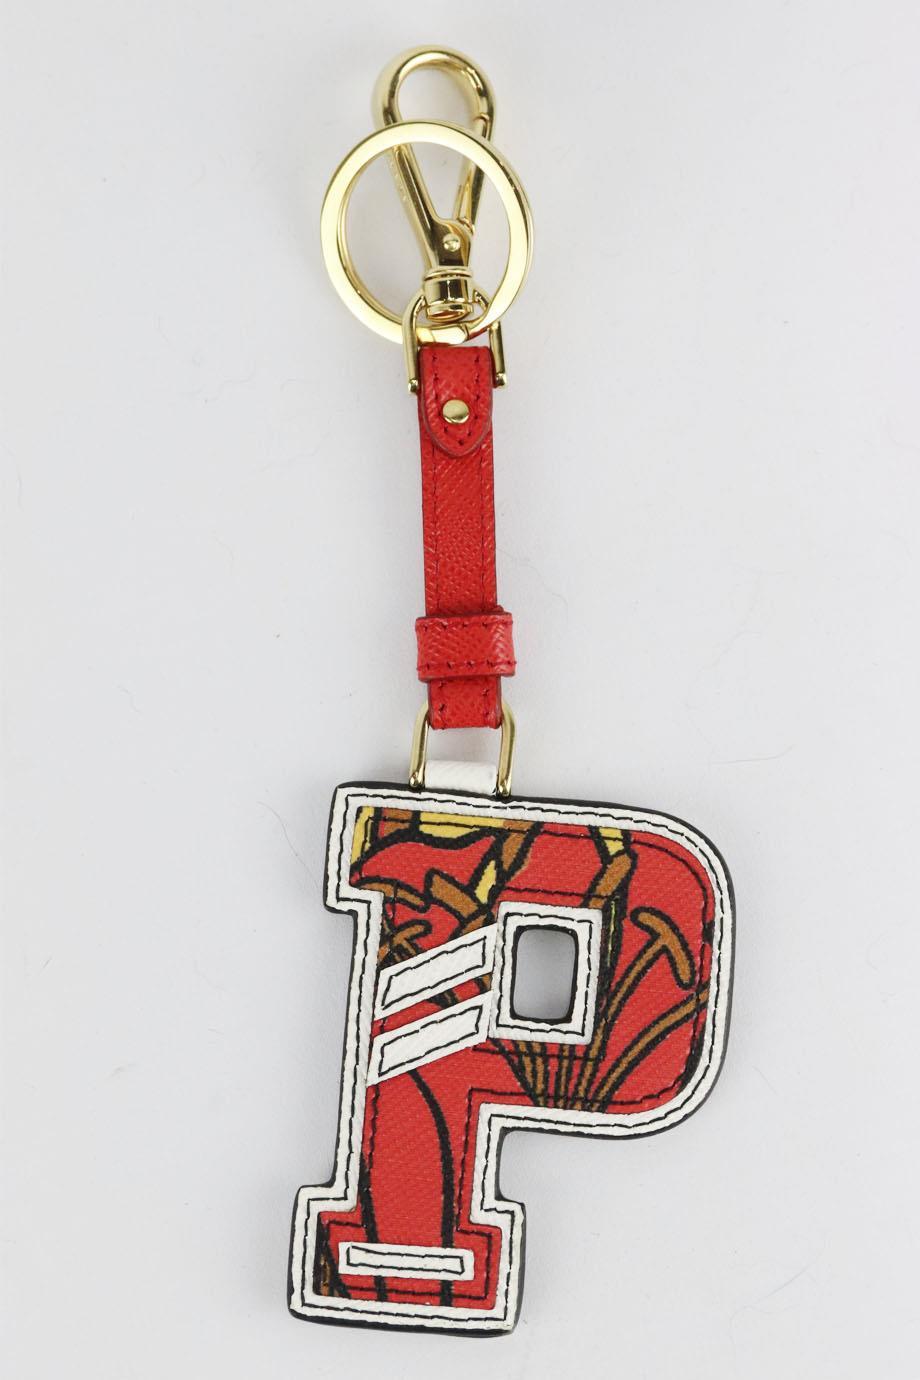 Prada 'P' initial printed textured leather bag charm. Red, brown, yellow and white. Lobster clasp fastening at top. Does not come with dustbag or box. Height: 7 in. Width: 2.2 in
